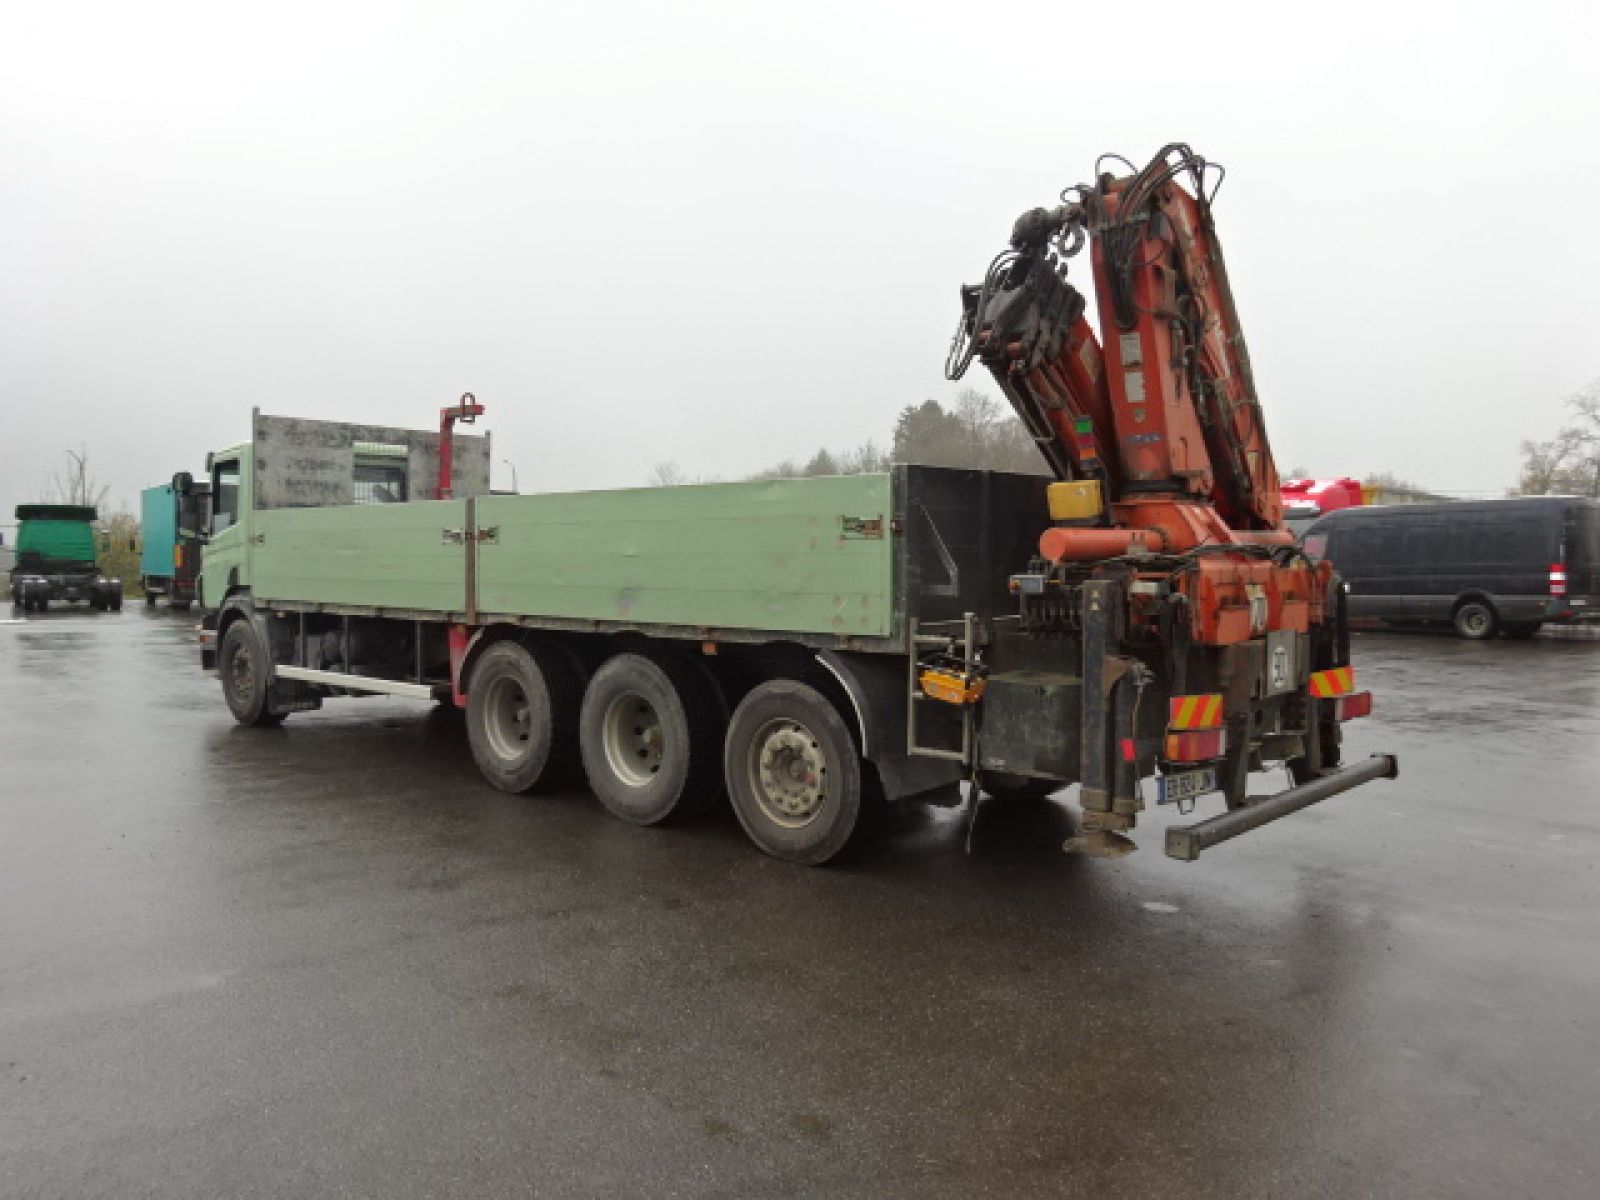 Second hand sale Truck units - SCANIA P380 8X4  PLATEAU GRUE (Belgique - Europe) - Houffalize Trading s.a.